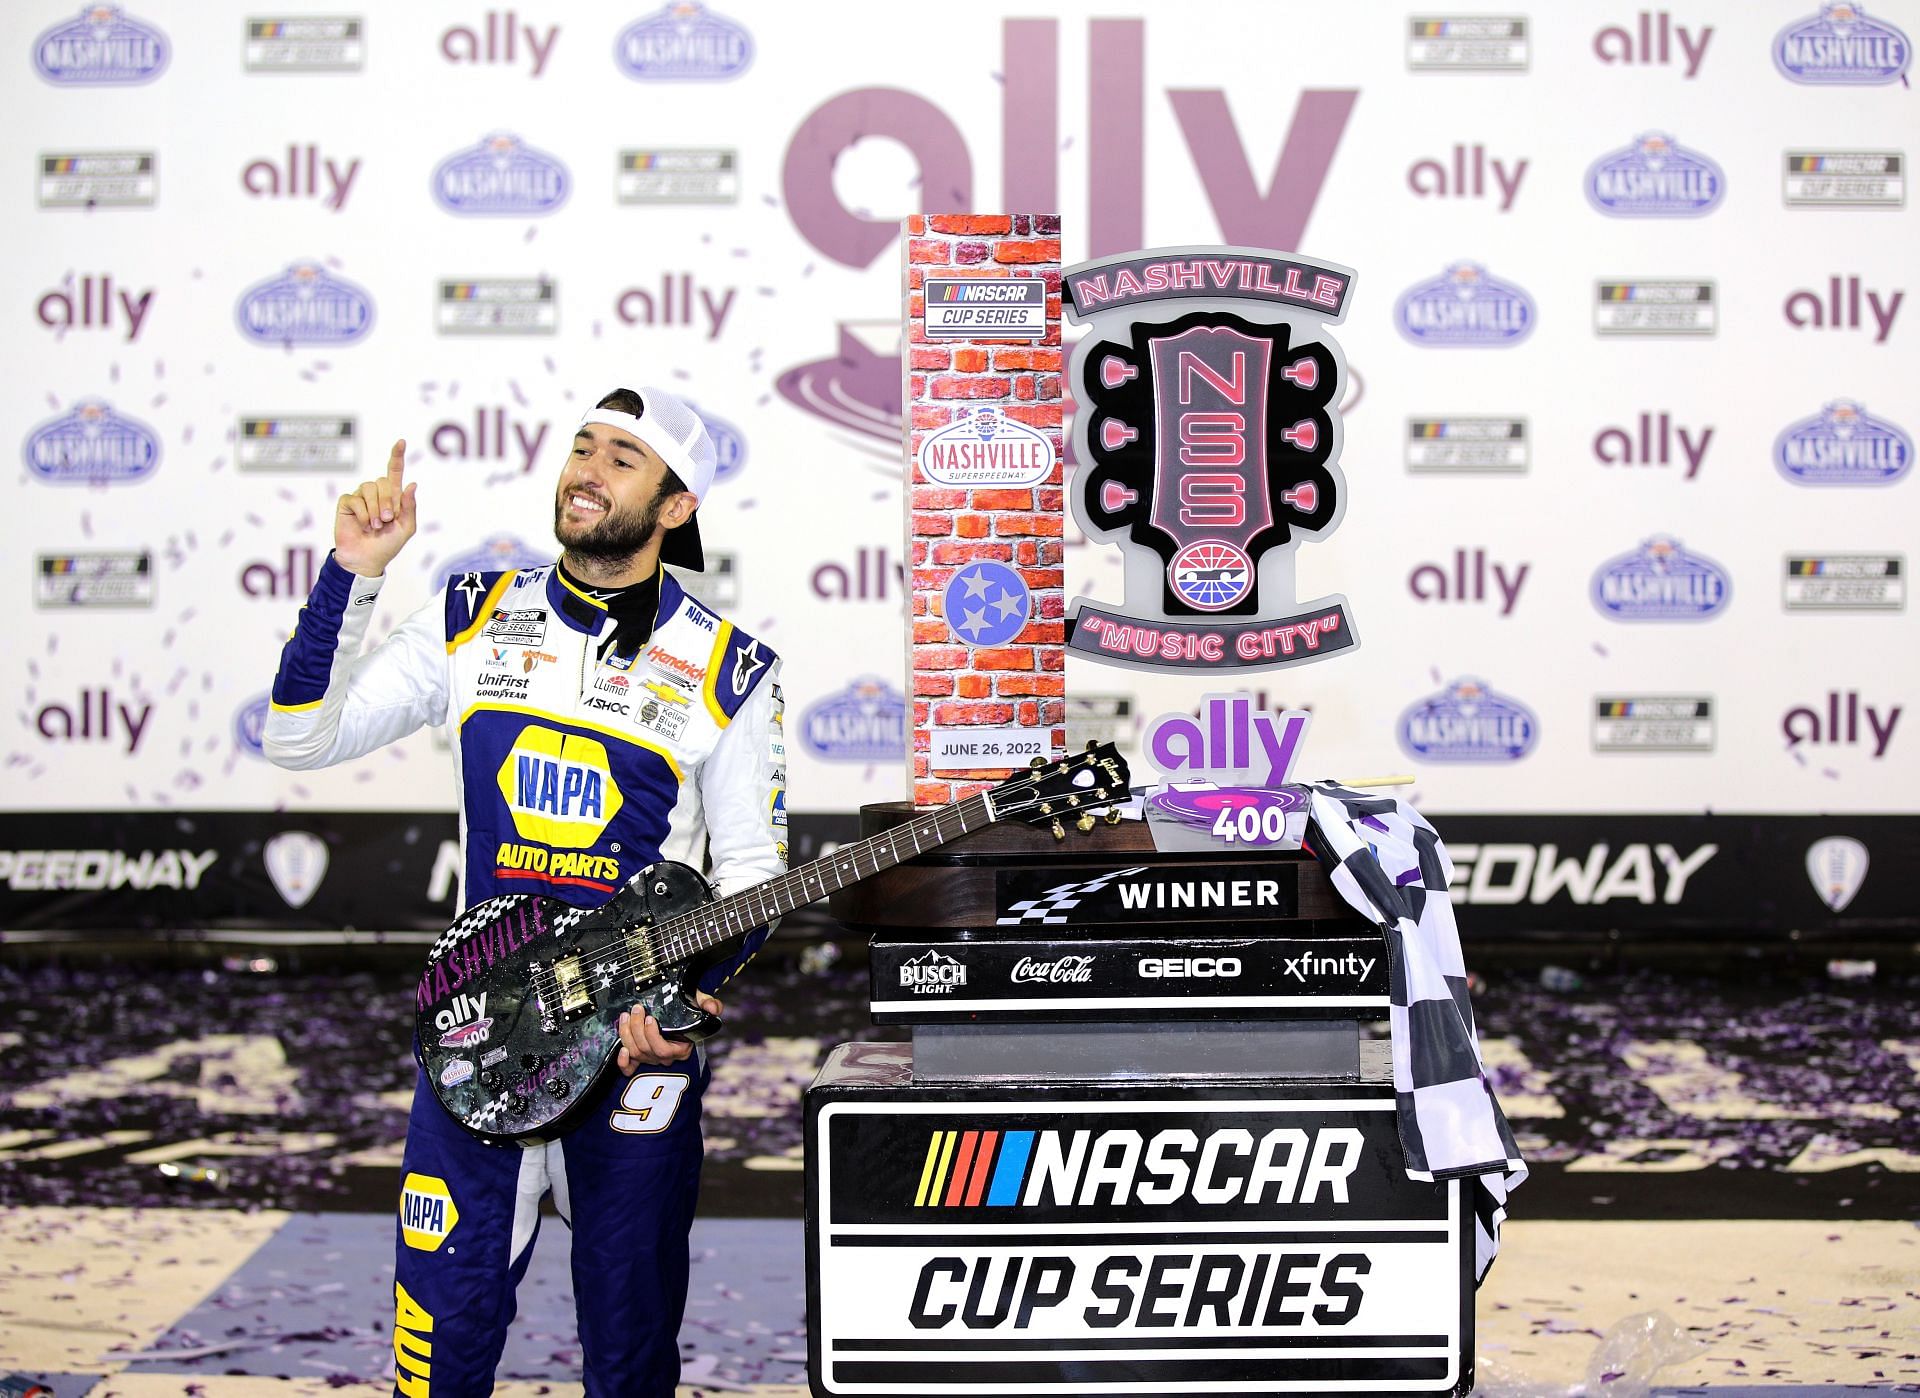 Chase Elliott celebrates in victory lane after winning the NASCAR Cup Series Ally 400 at Nashville Superspeedway